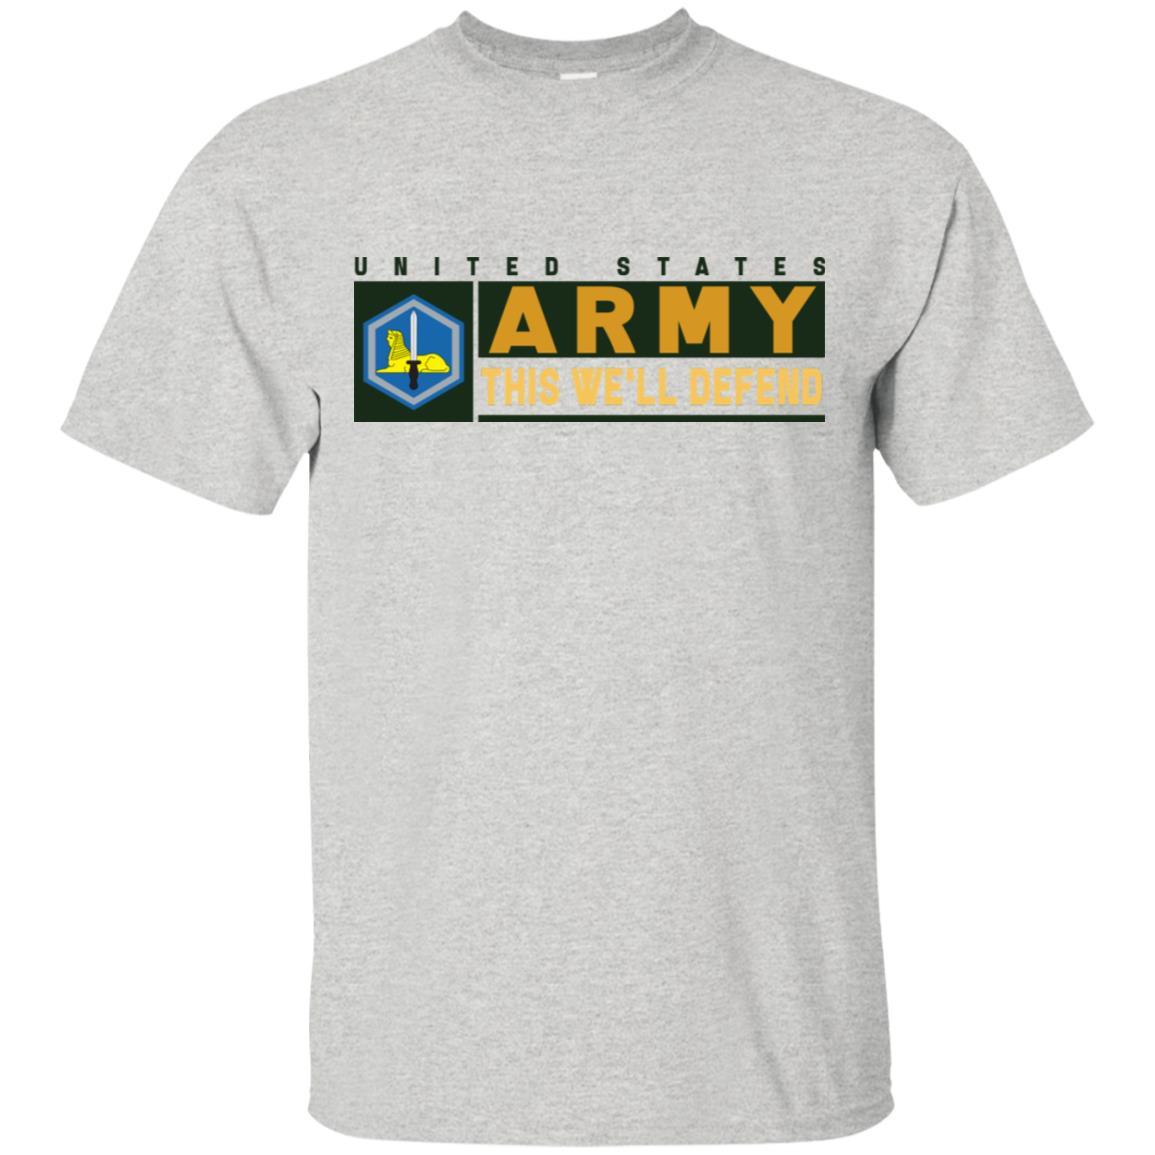 US Army 66TH MILITARY INTELLIGENCE BRIGADE- This We'll Defend T-Shirt On Front For Men-TShirt-Army-Veterans Nation